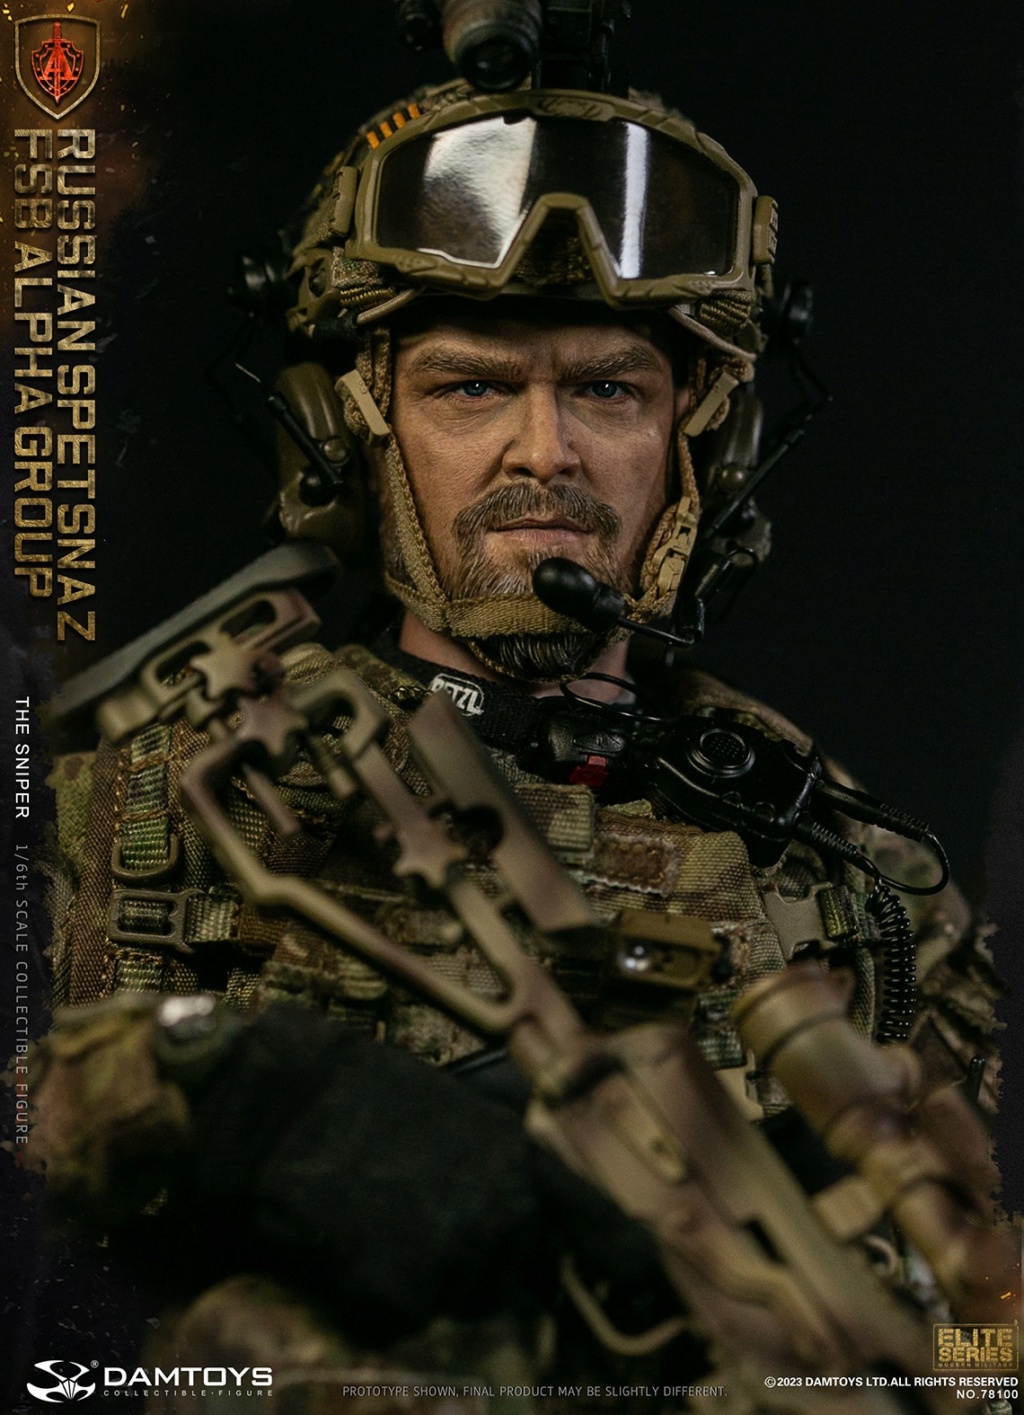 modernmilitary - NEW PRODUCT: DAMTOYS : 1/6 RUSSIAN SPETSNAZ FSB ALPHA GROUP SNIPER Action Figure 12463810